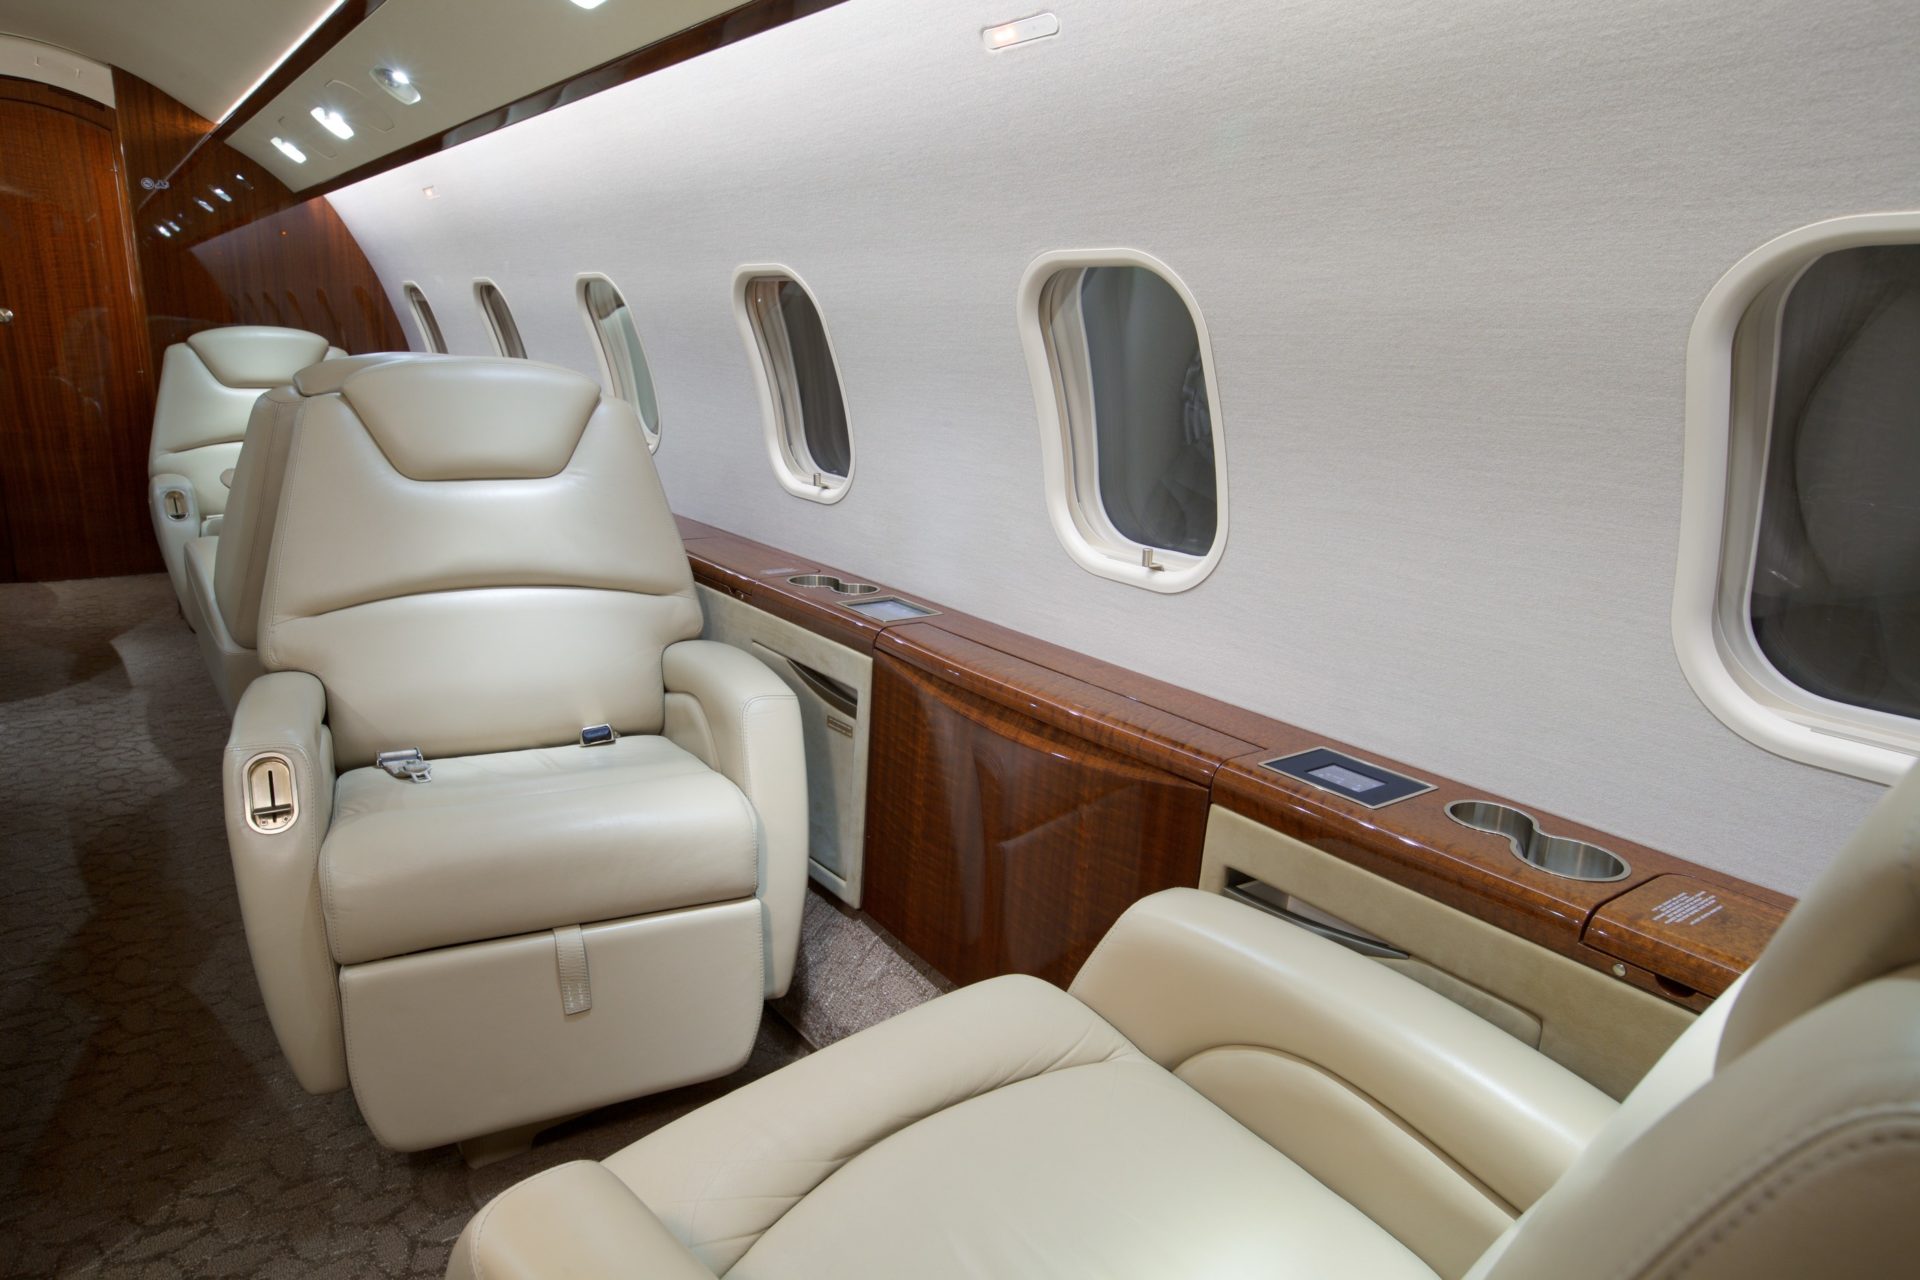 Cabin area with 4 reclining seats along wall